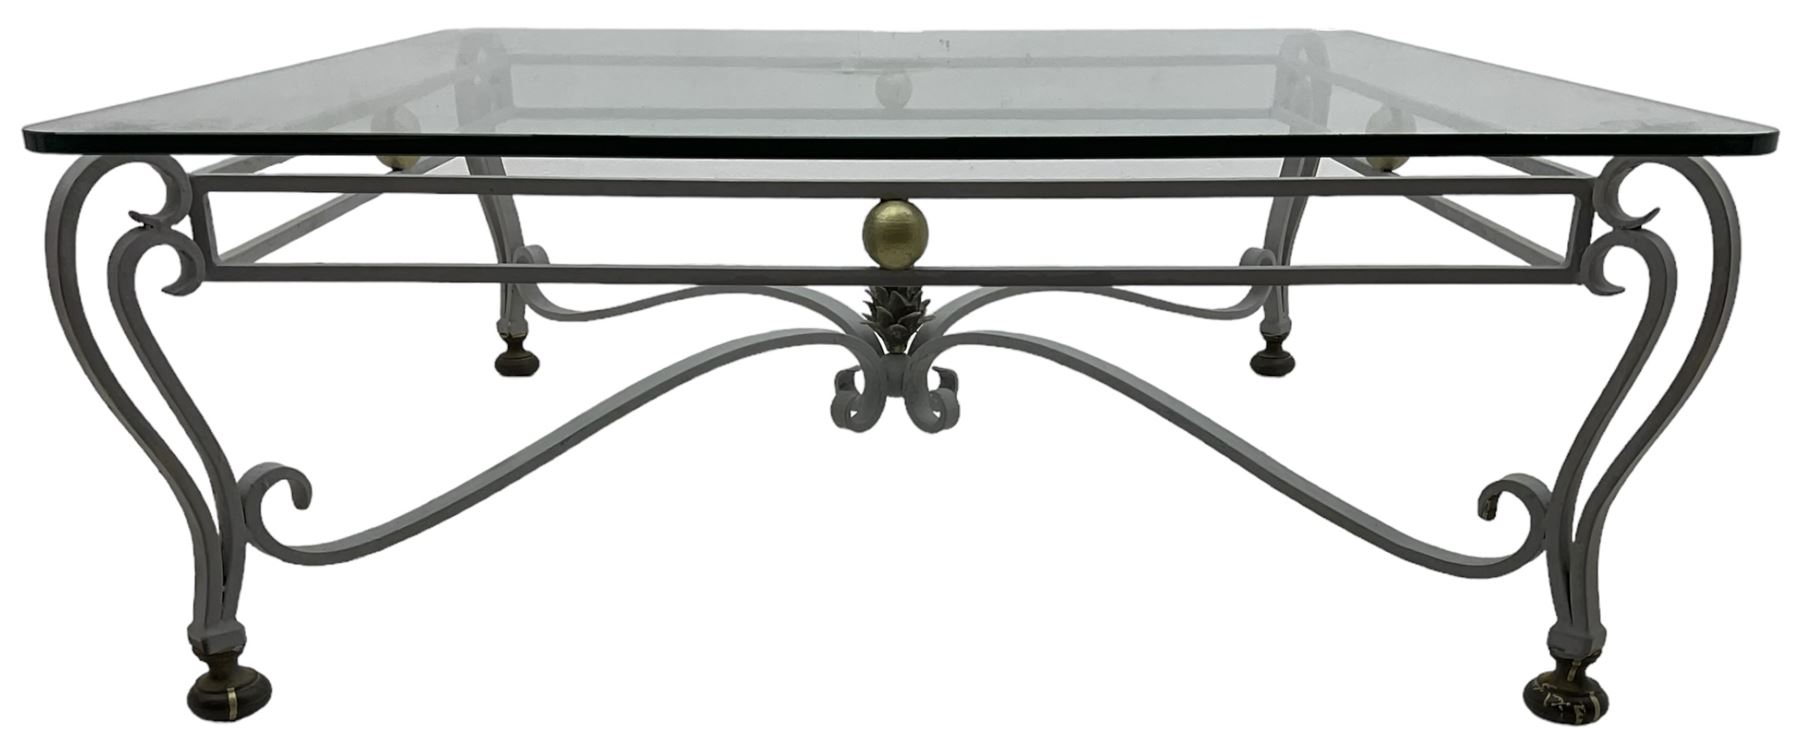 Wrought metal and glass top coffee table - Image 5 of 6